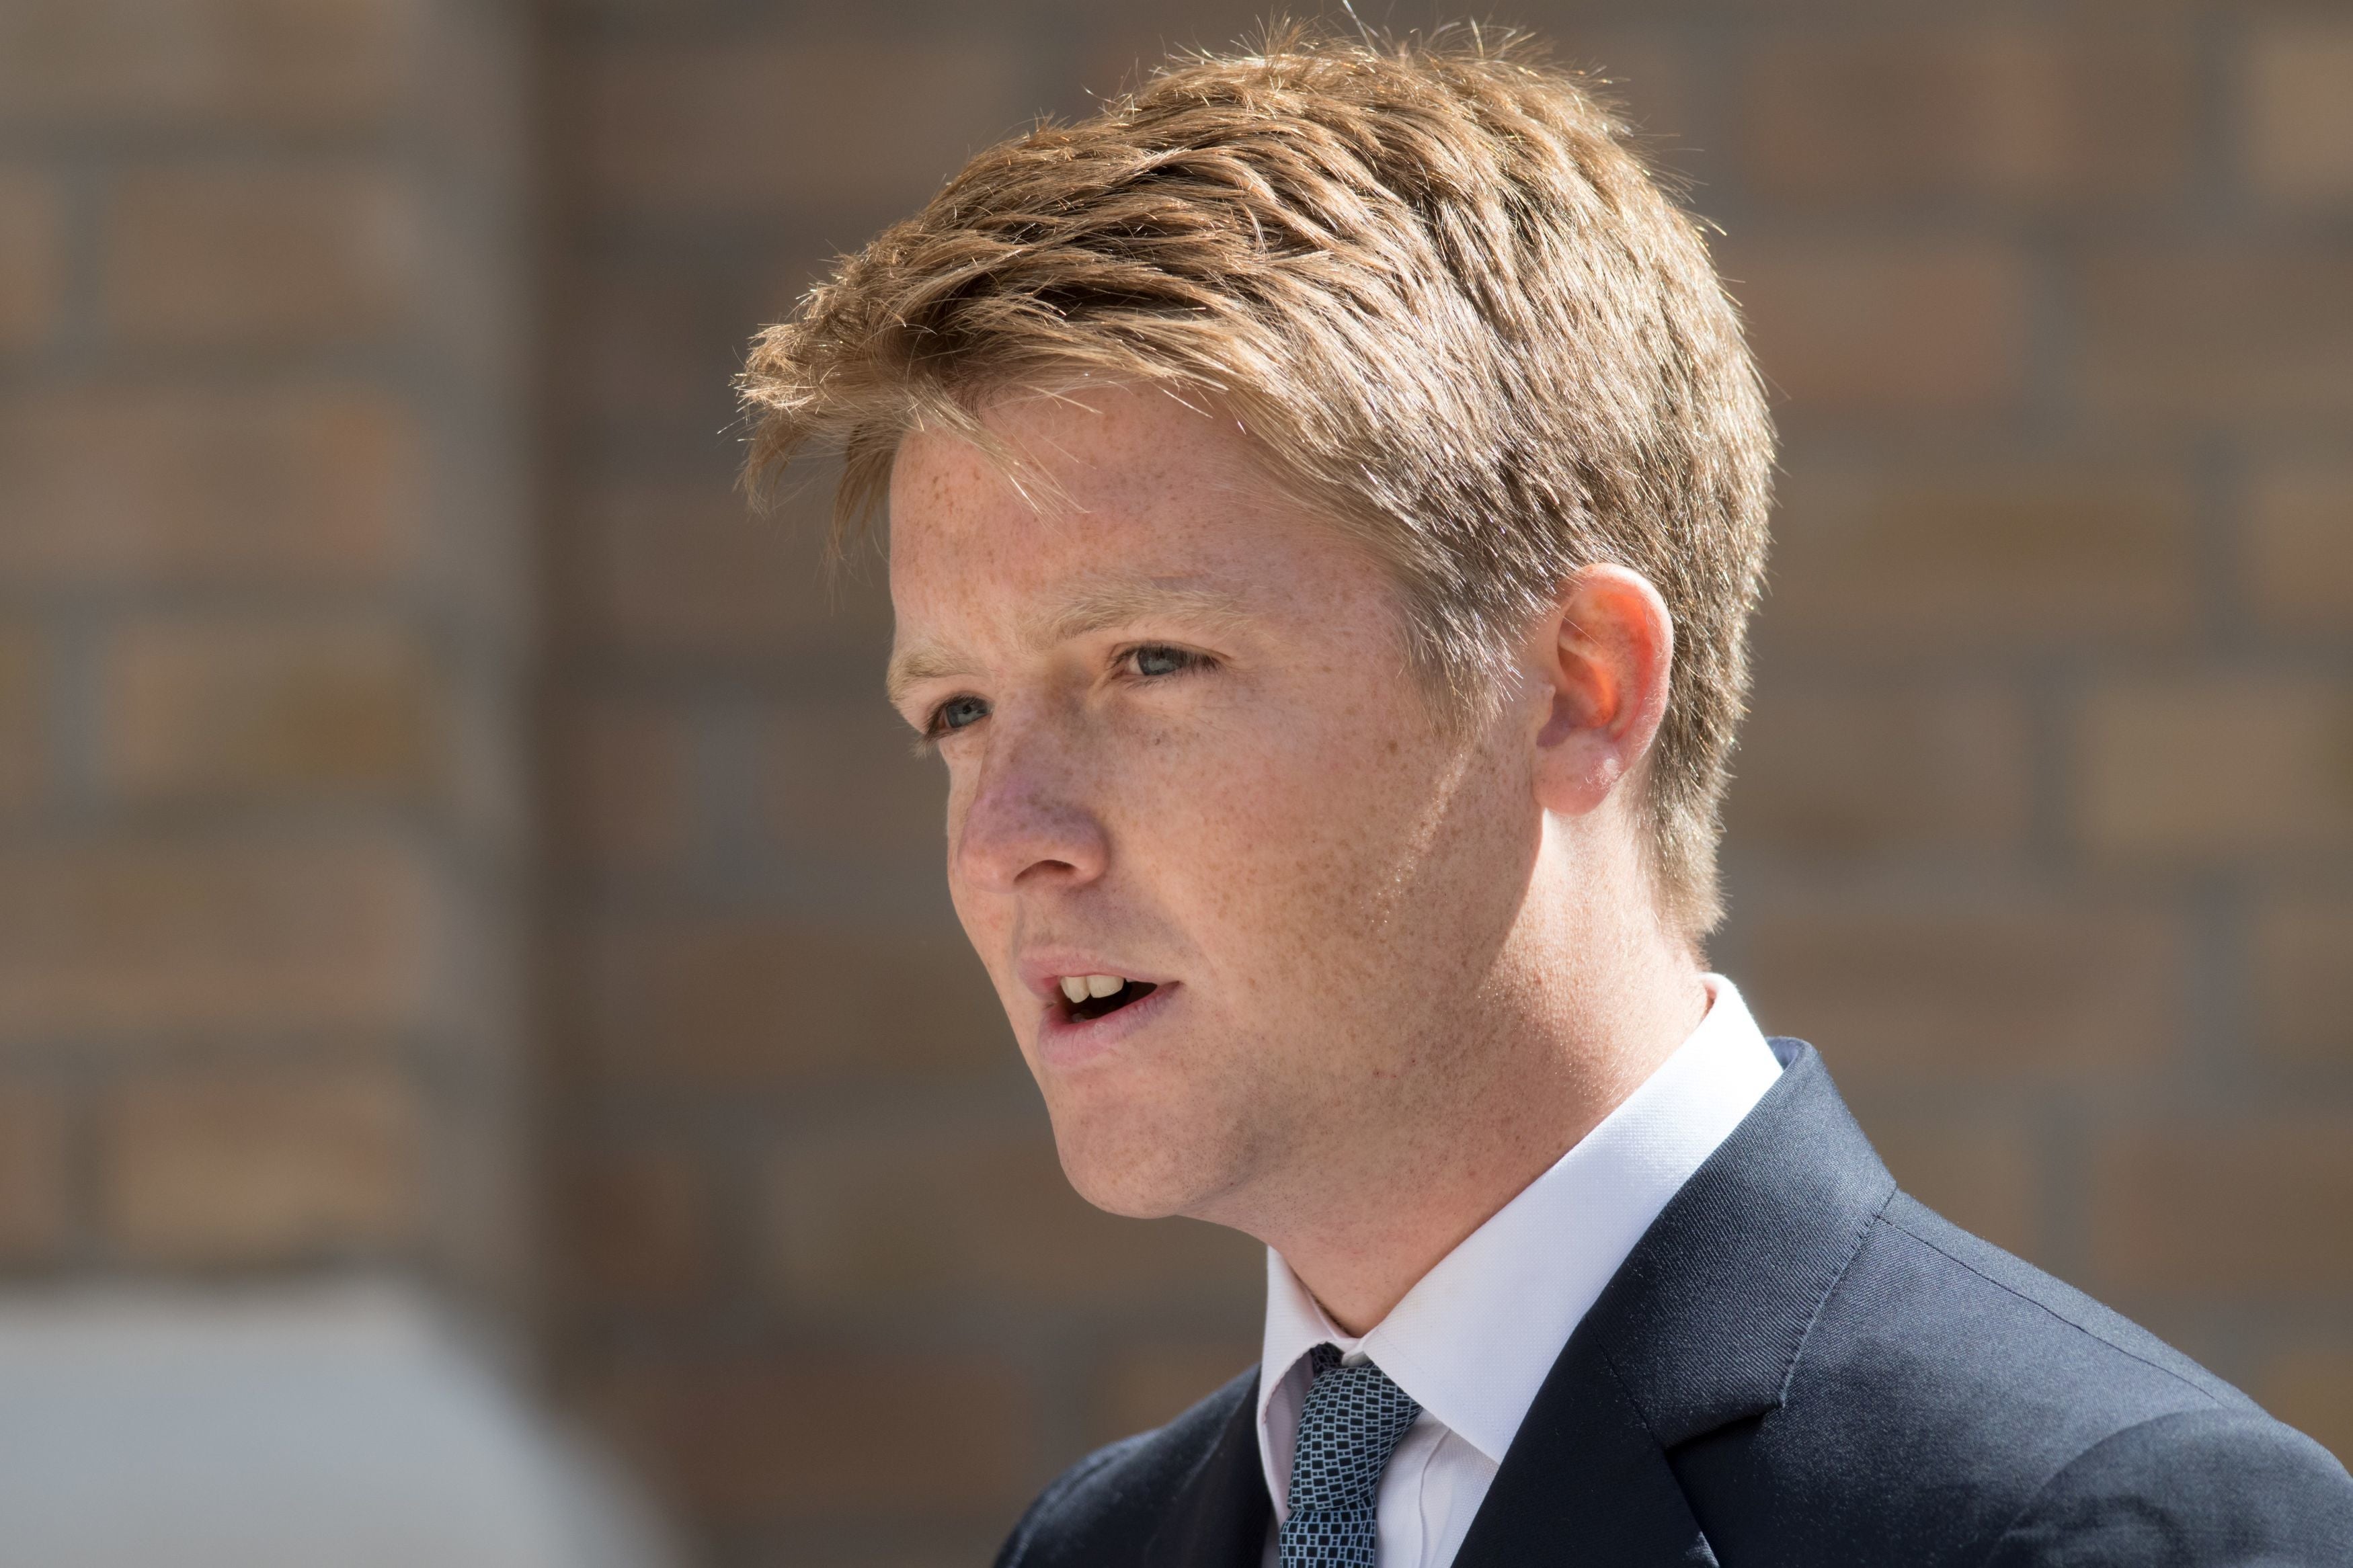 Hugh Grosvenor, the seventh Duke of Westminster, is the third richest man in the UK